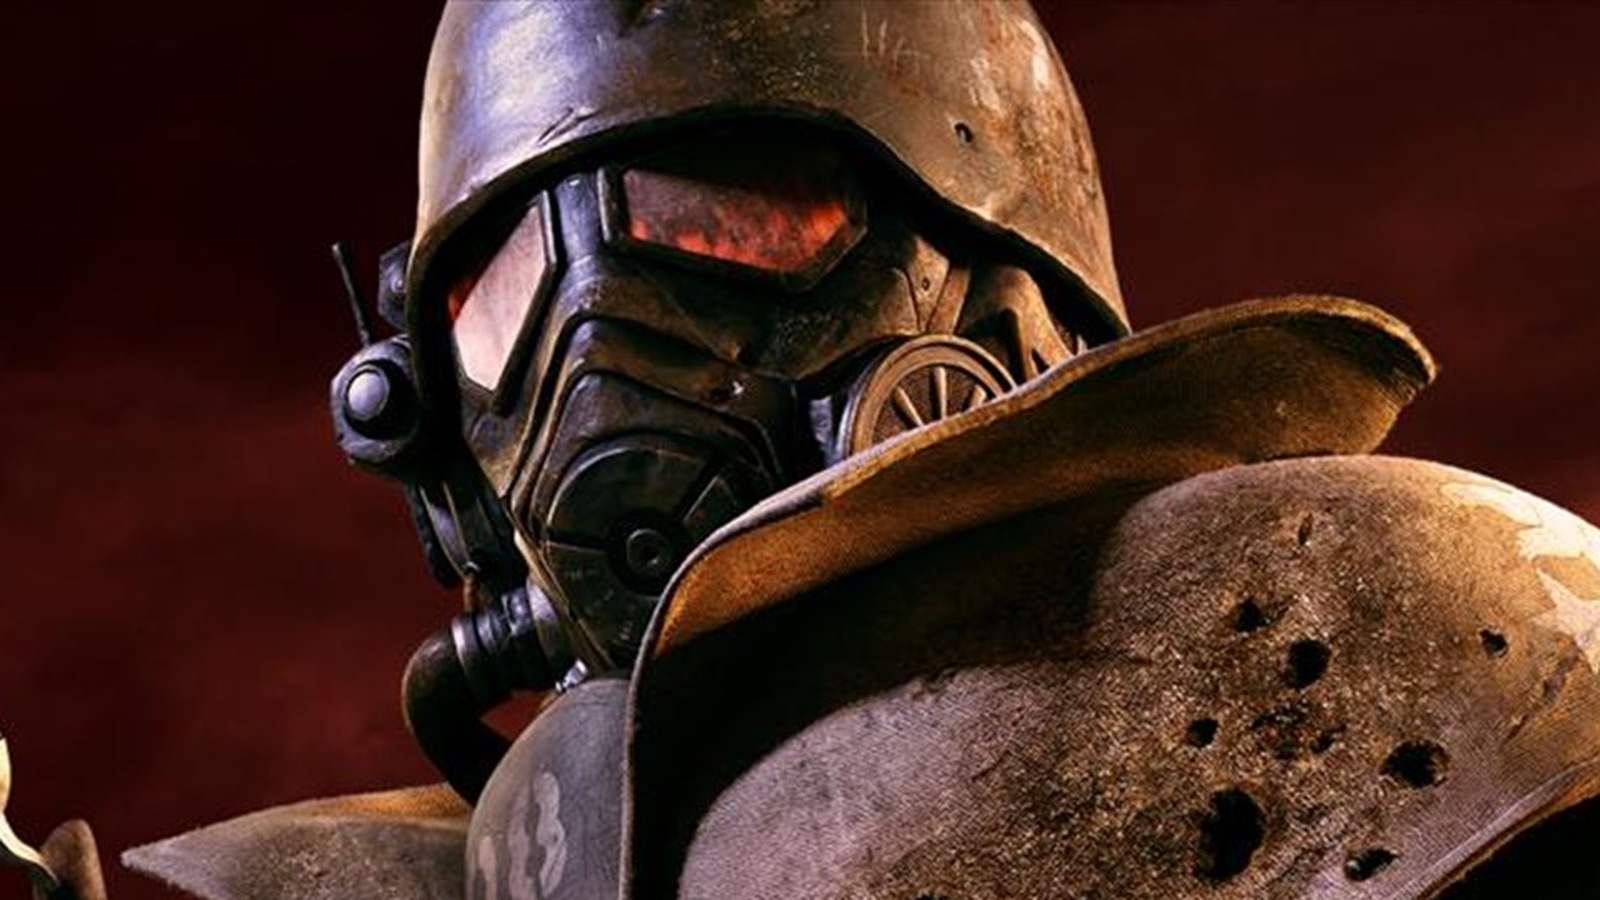 fallout war never changes voice actor